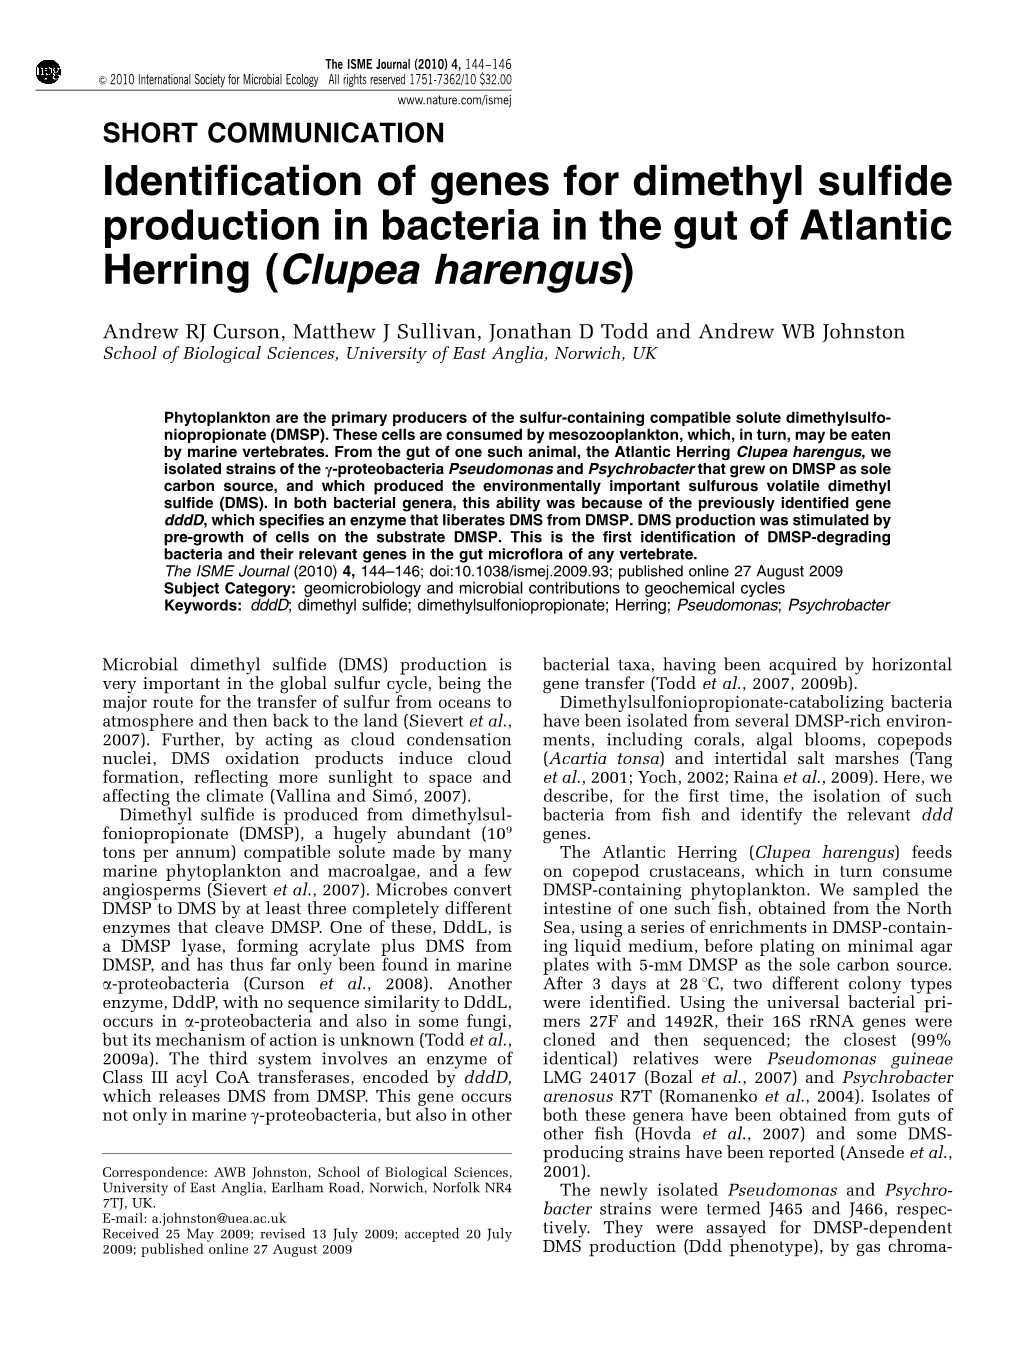 Identification of Genes for Dimethyl Sulfide Production in Bacteria in the Gut of Atlantic Herring (Clupea Harengus)